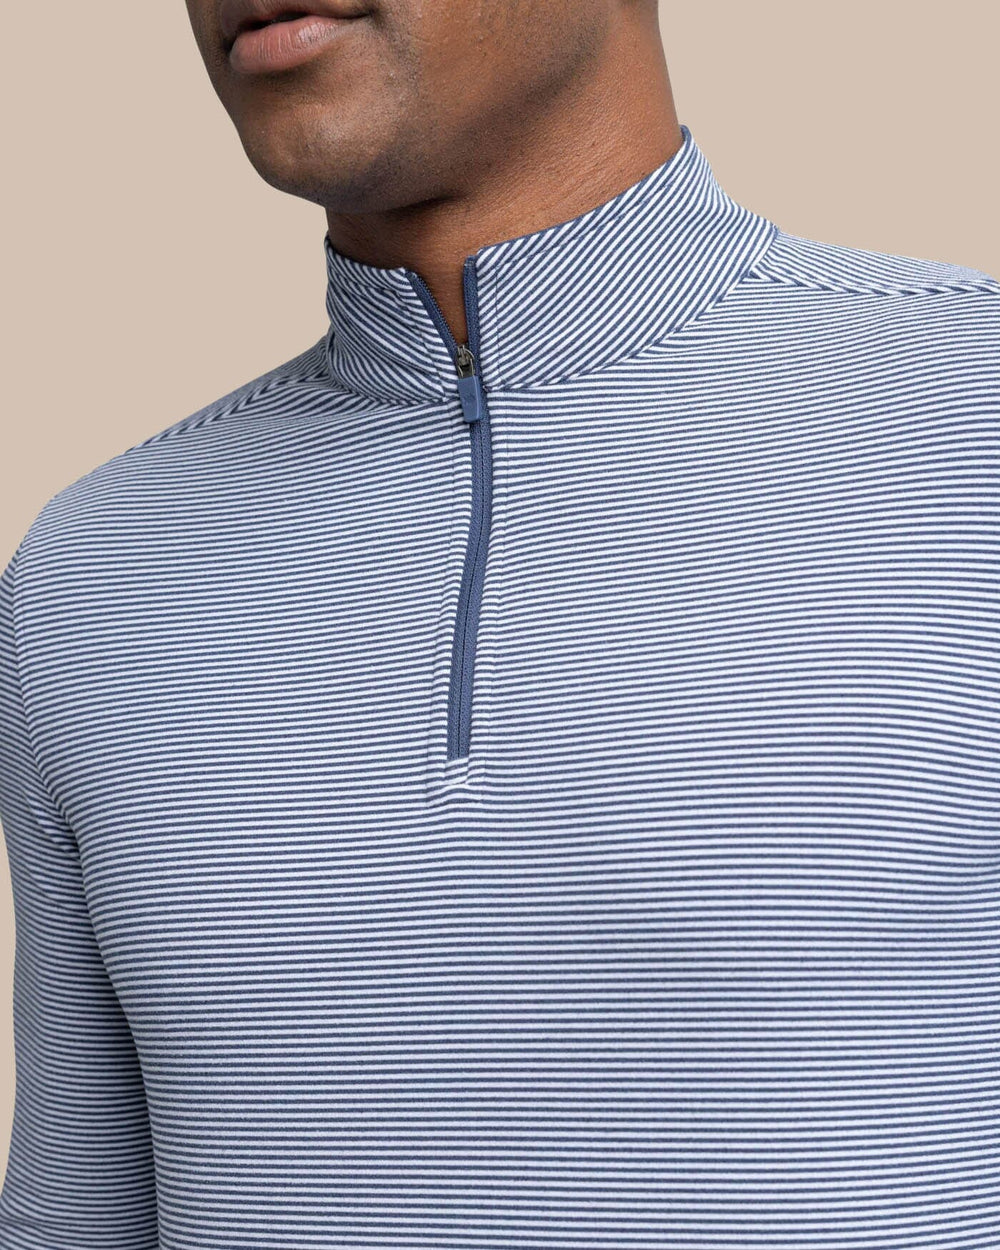 The detail view of the Southern Tide Cruiser Micro-Stripe Heather Quarter Zip by Southern Tide - Heather Navy